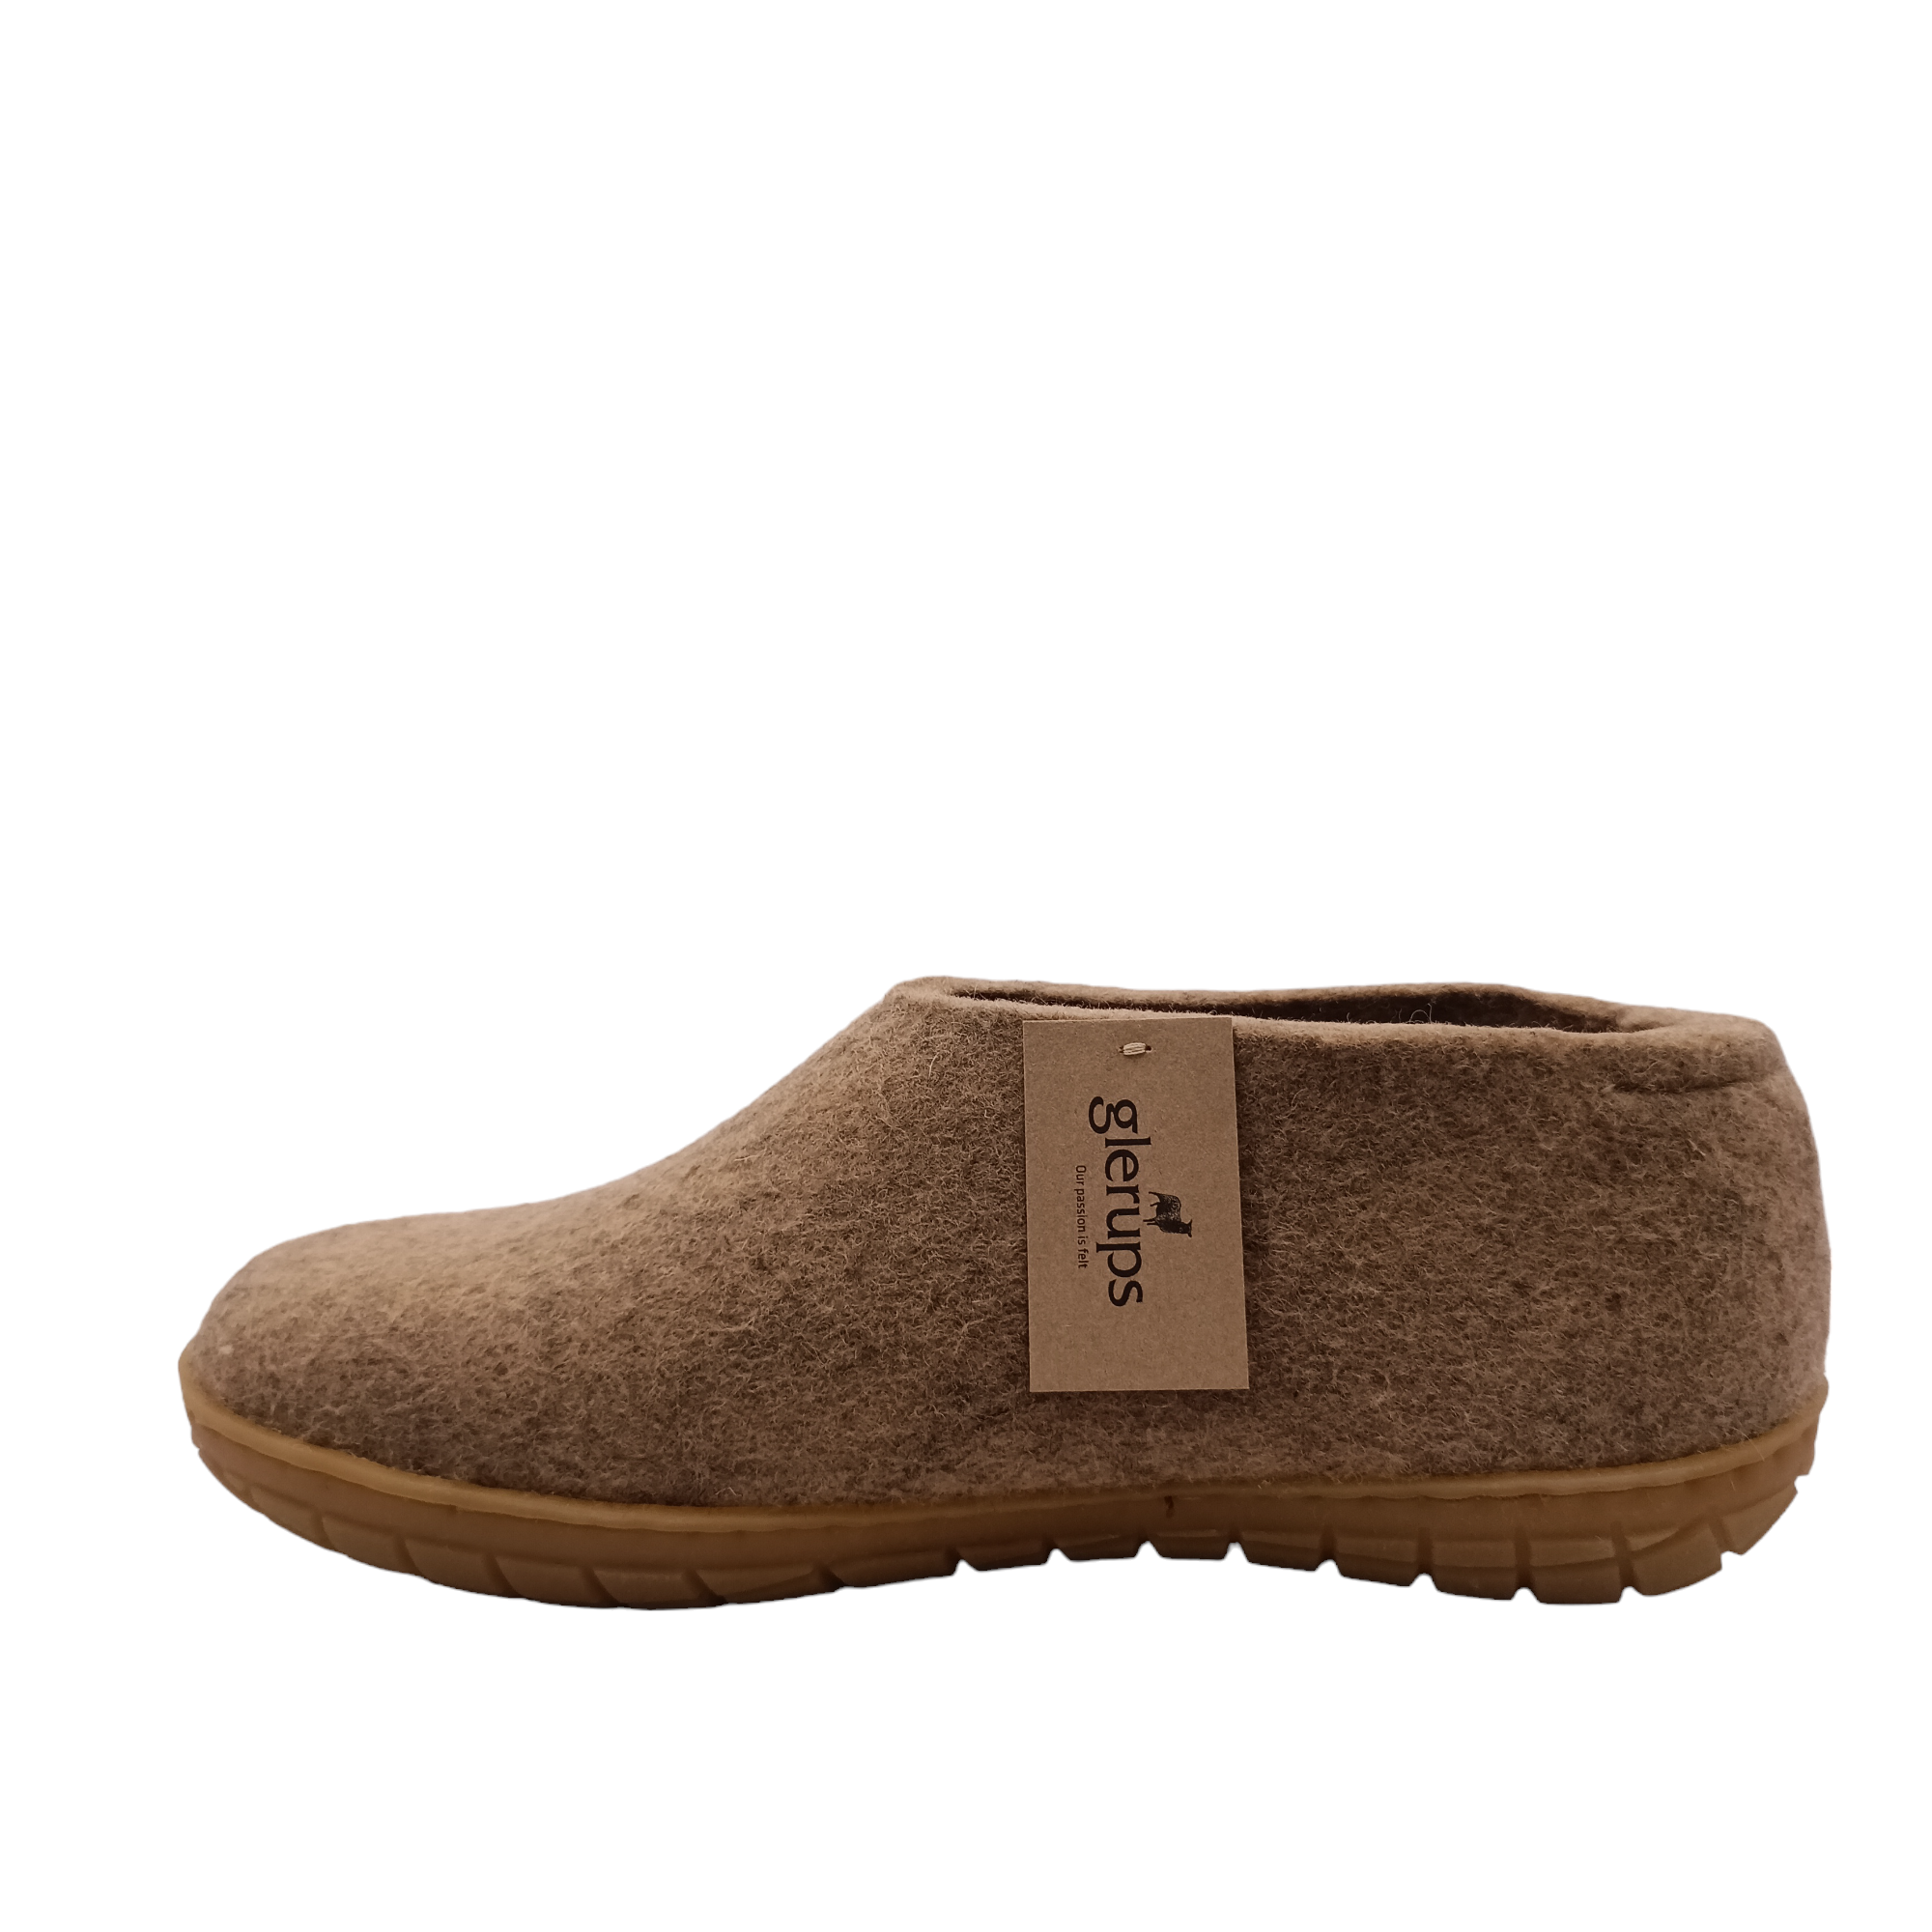 Side angle view off sand coloured felt wool Glerup shoe or slipper. Shop slippers online and instore with shoe&amp;me Mount Maunganui.